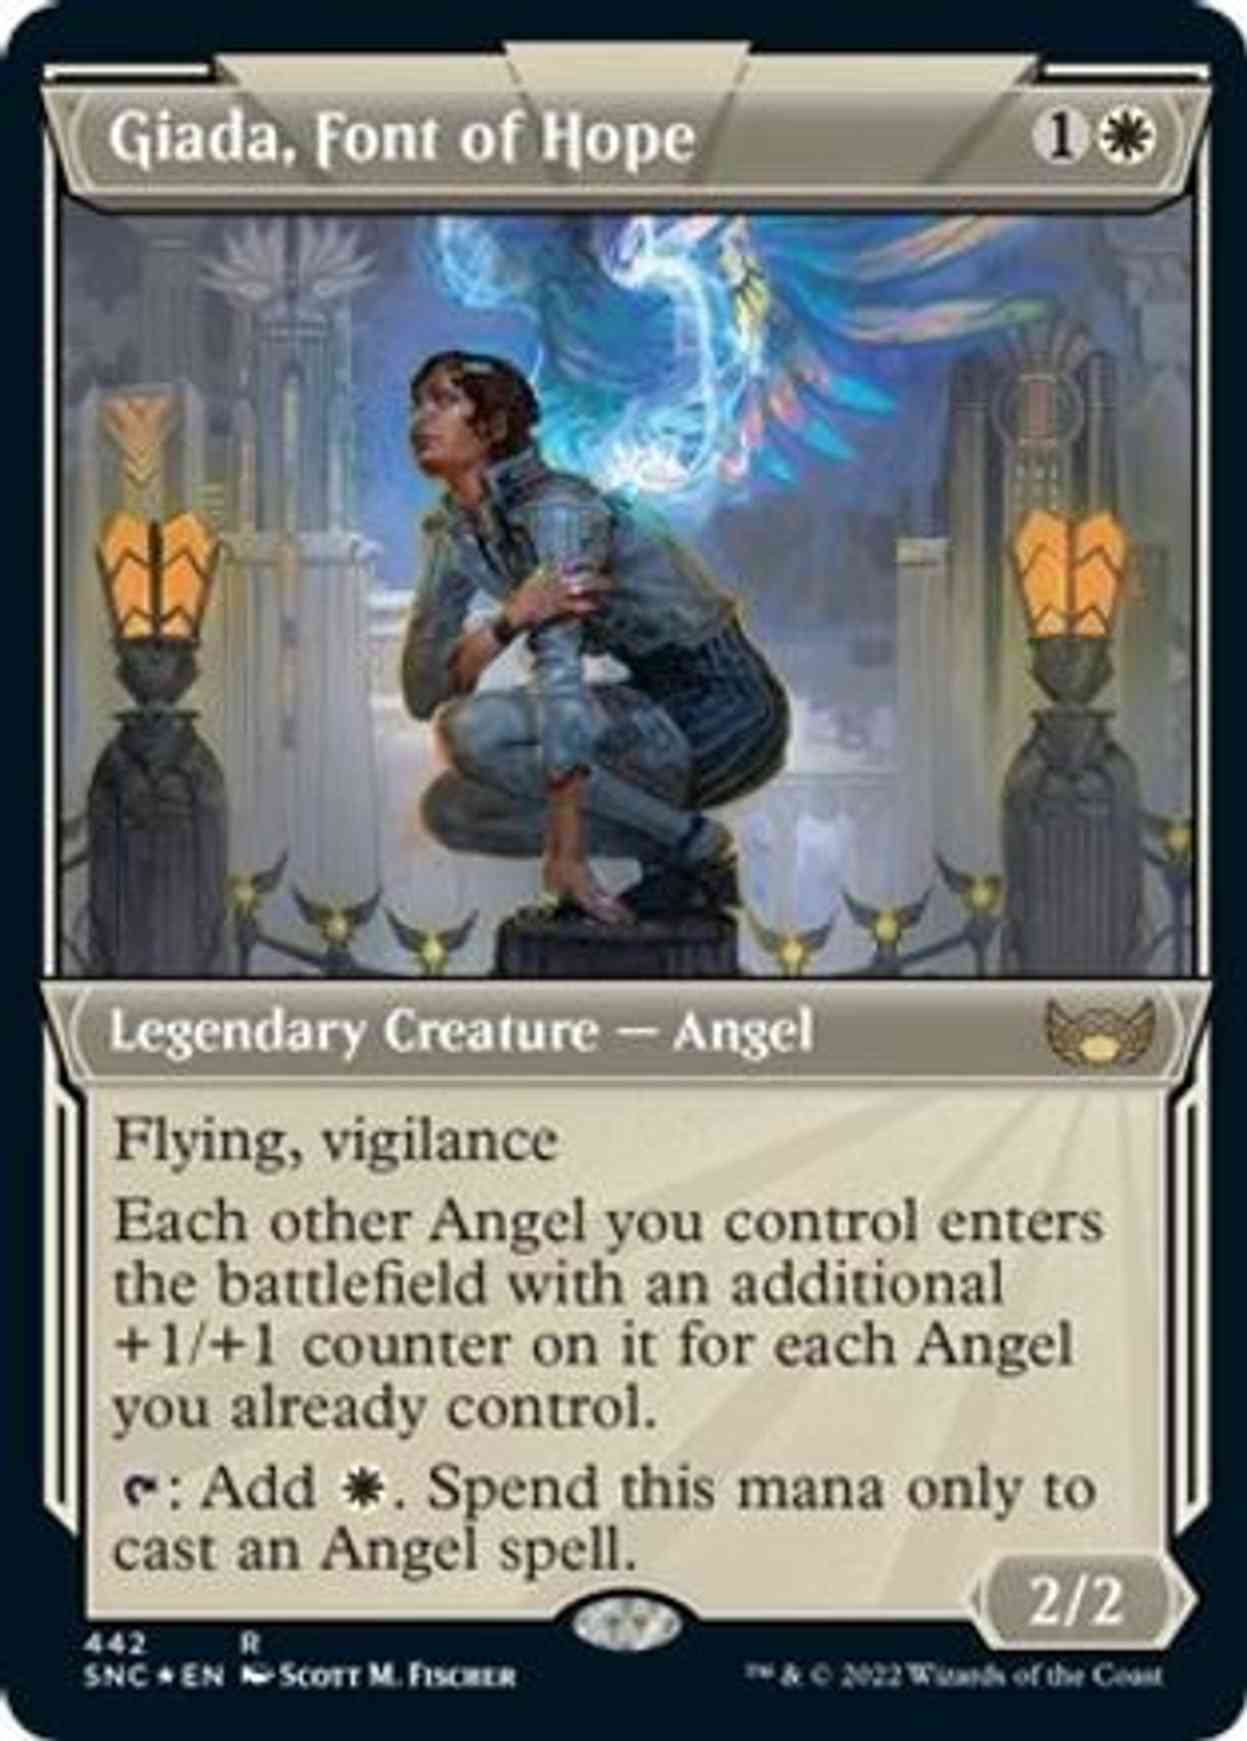 Giada, Font of Hope (Showcase) (Etched Foil) magic card front